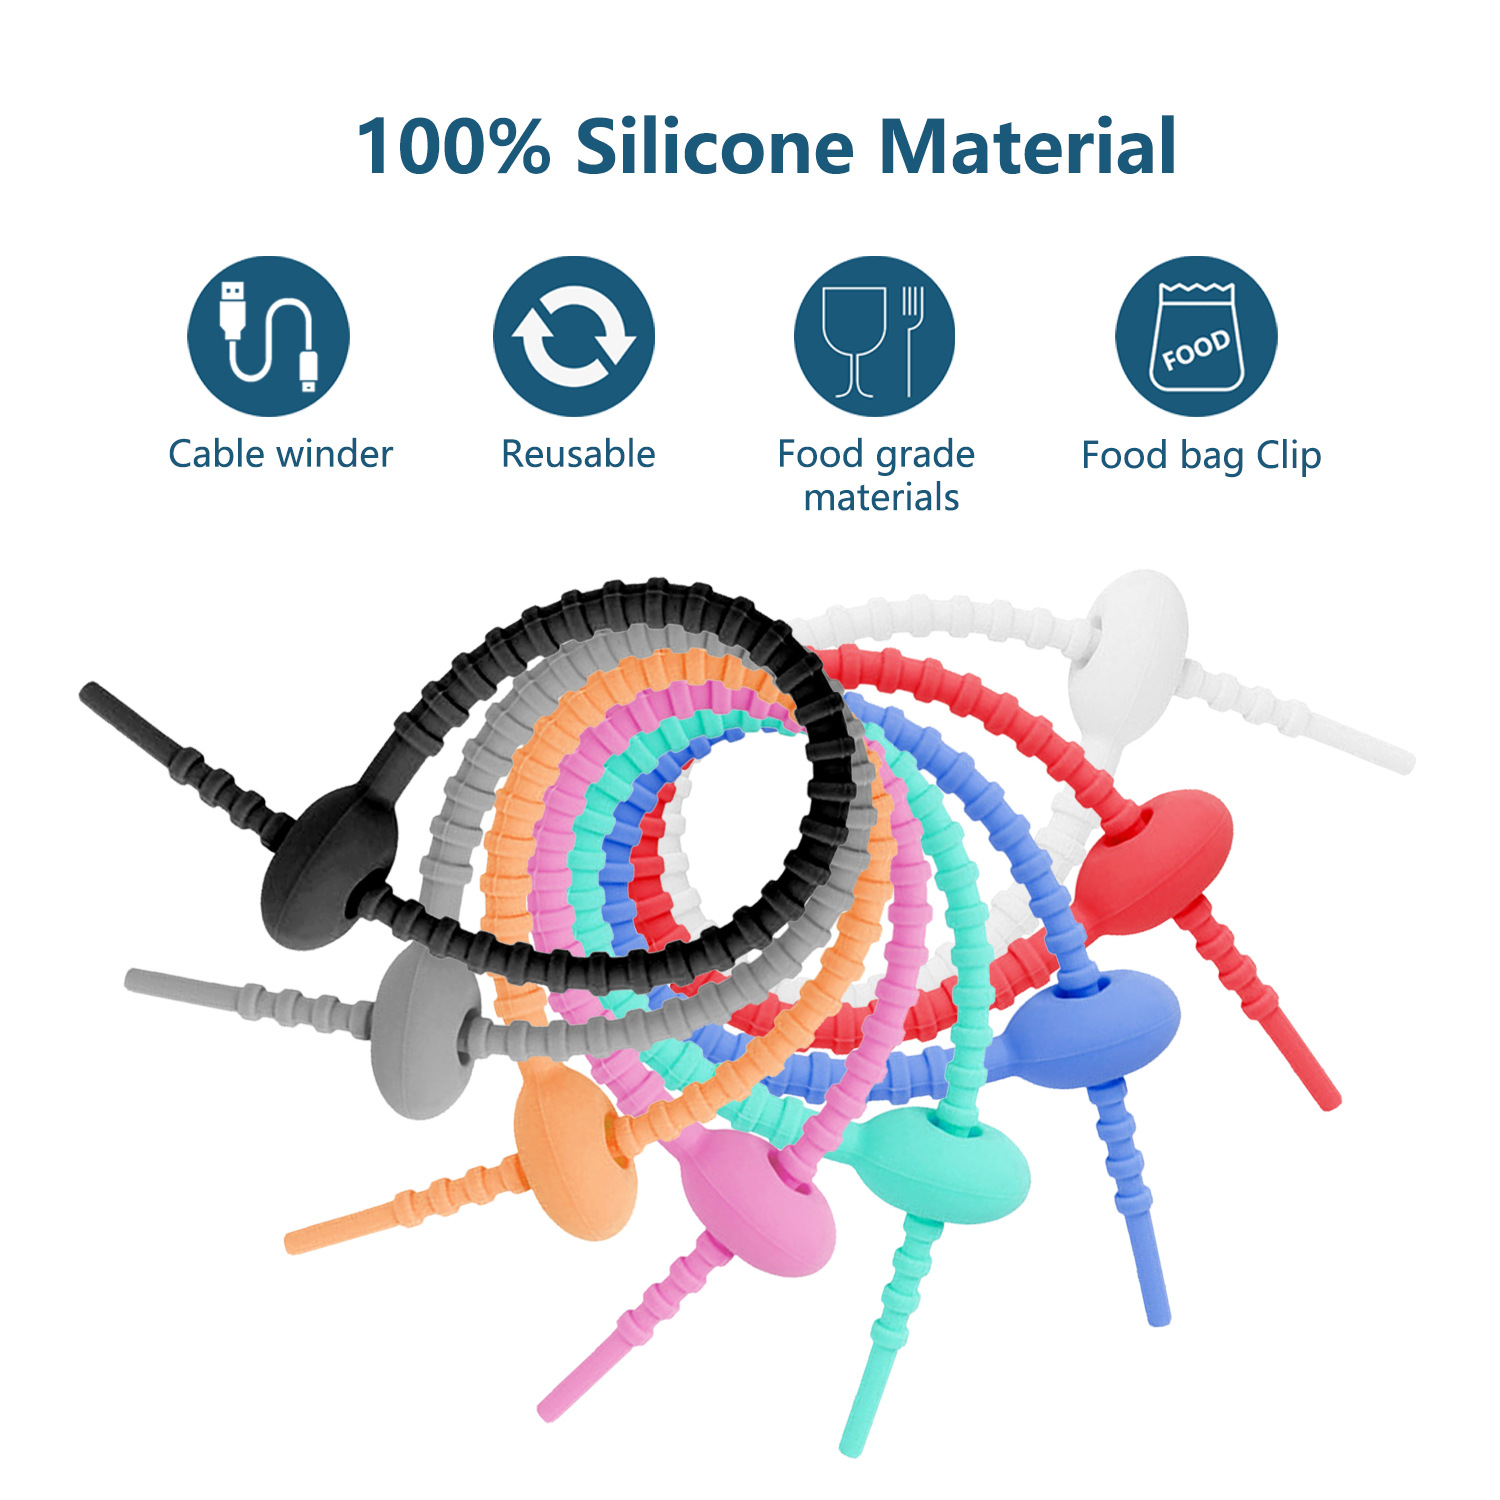 20 Pieces Colorful Silicone Ties Bag Clip,Cable Straps, Bread Tie, Reusable  Rubber Twist Tie, All-Purpose Silicone Ties, Cable Ties,Silicone  Cord,Household Snake Ties, Bag Sealing Clips : : Home Improvement